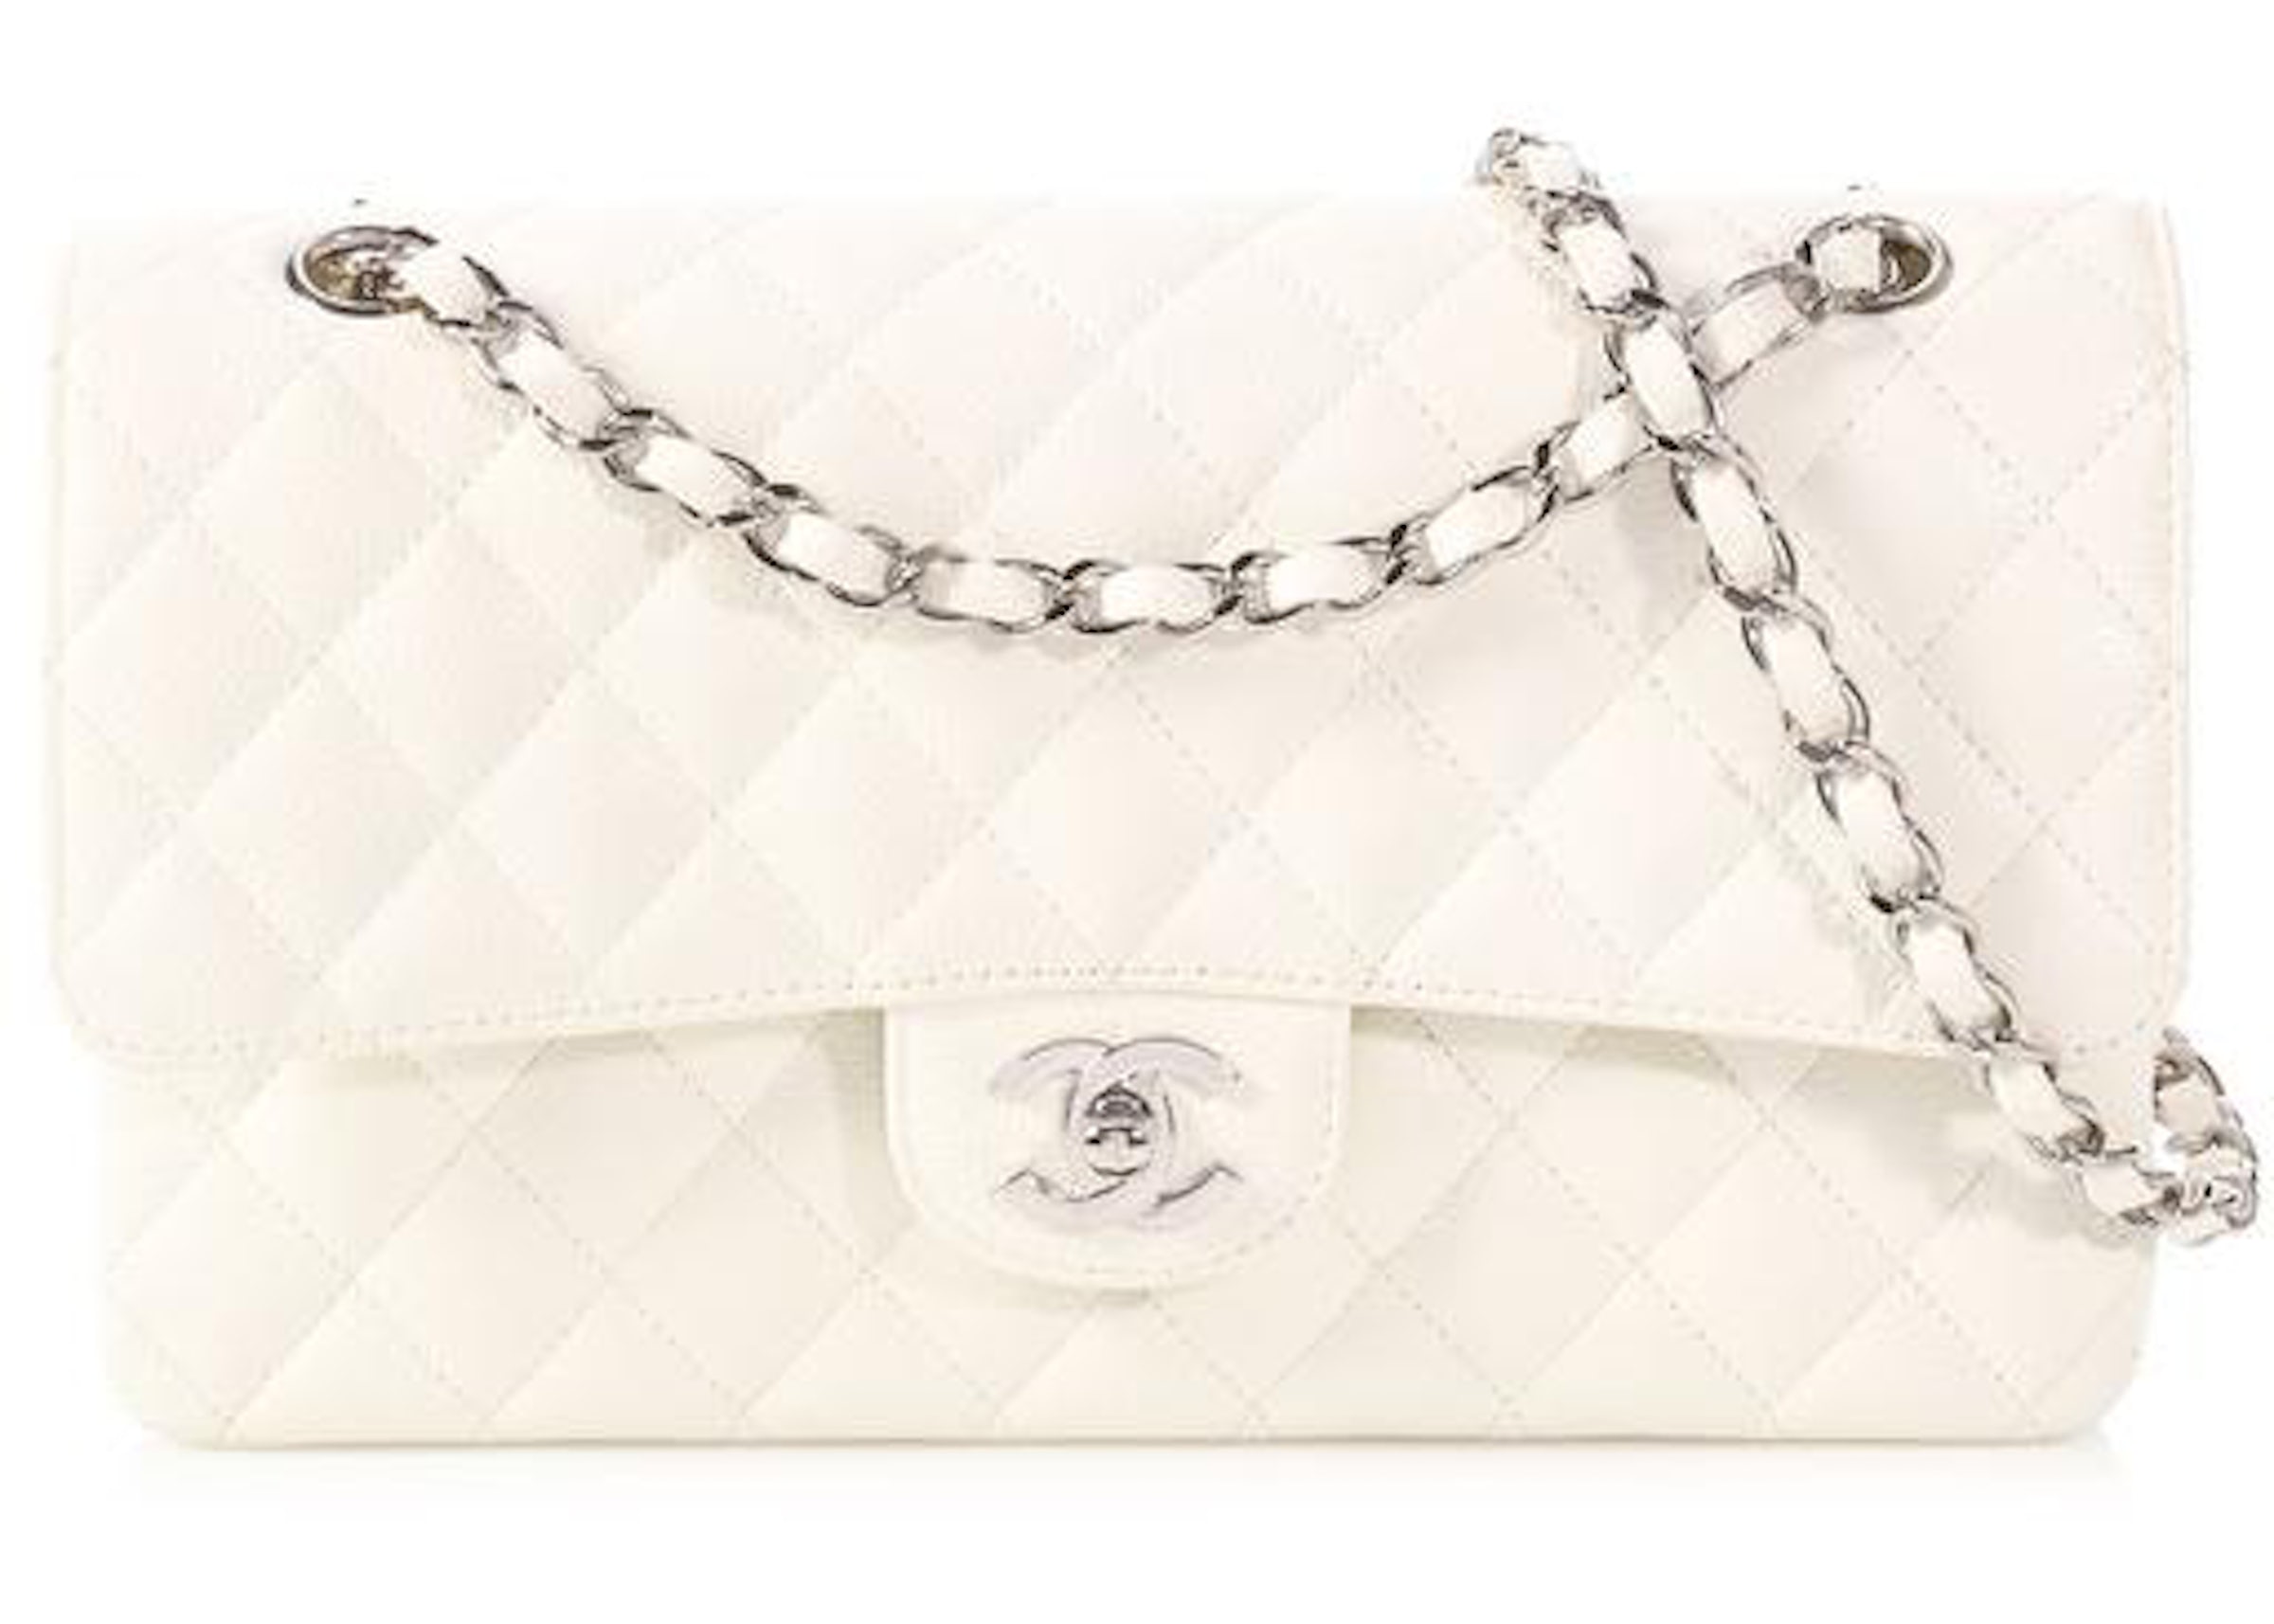 CHANEL Caviar Quilted Medium Double Flap White 1138710